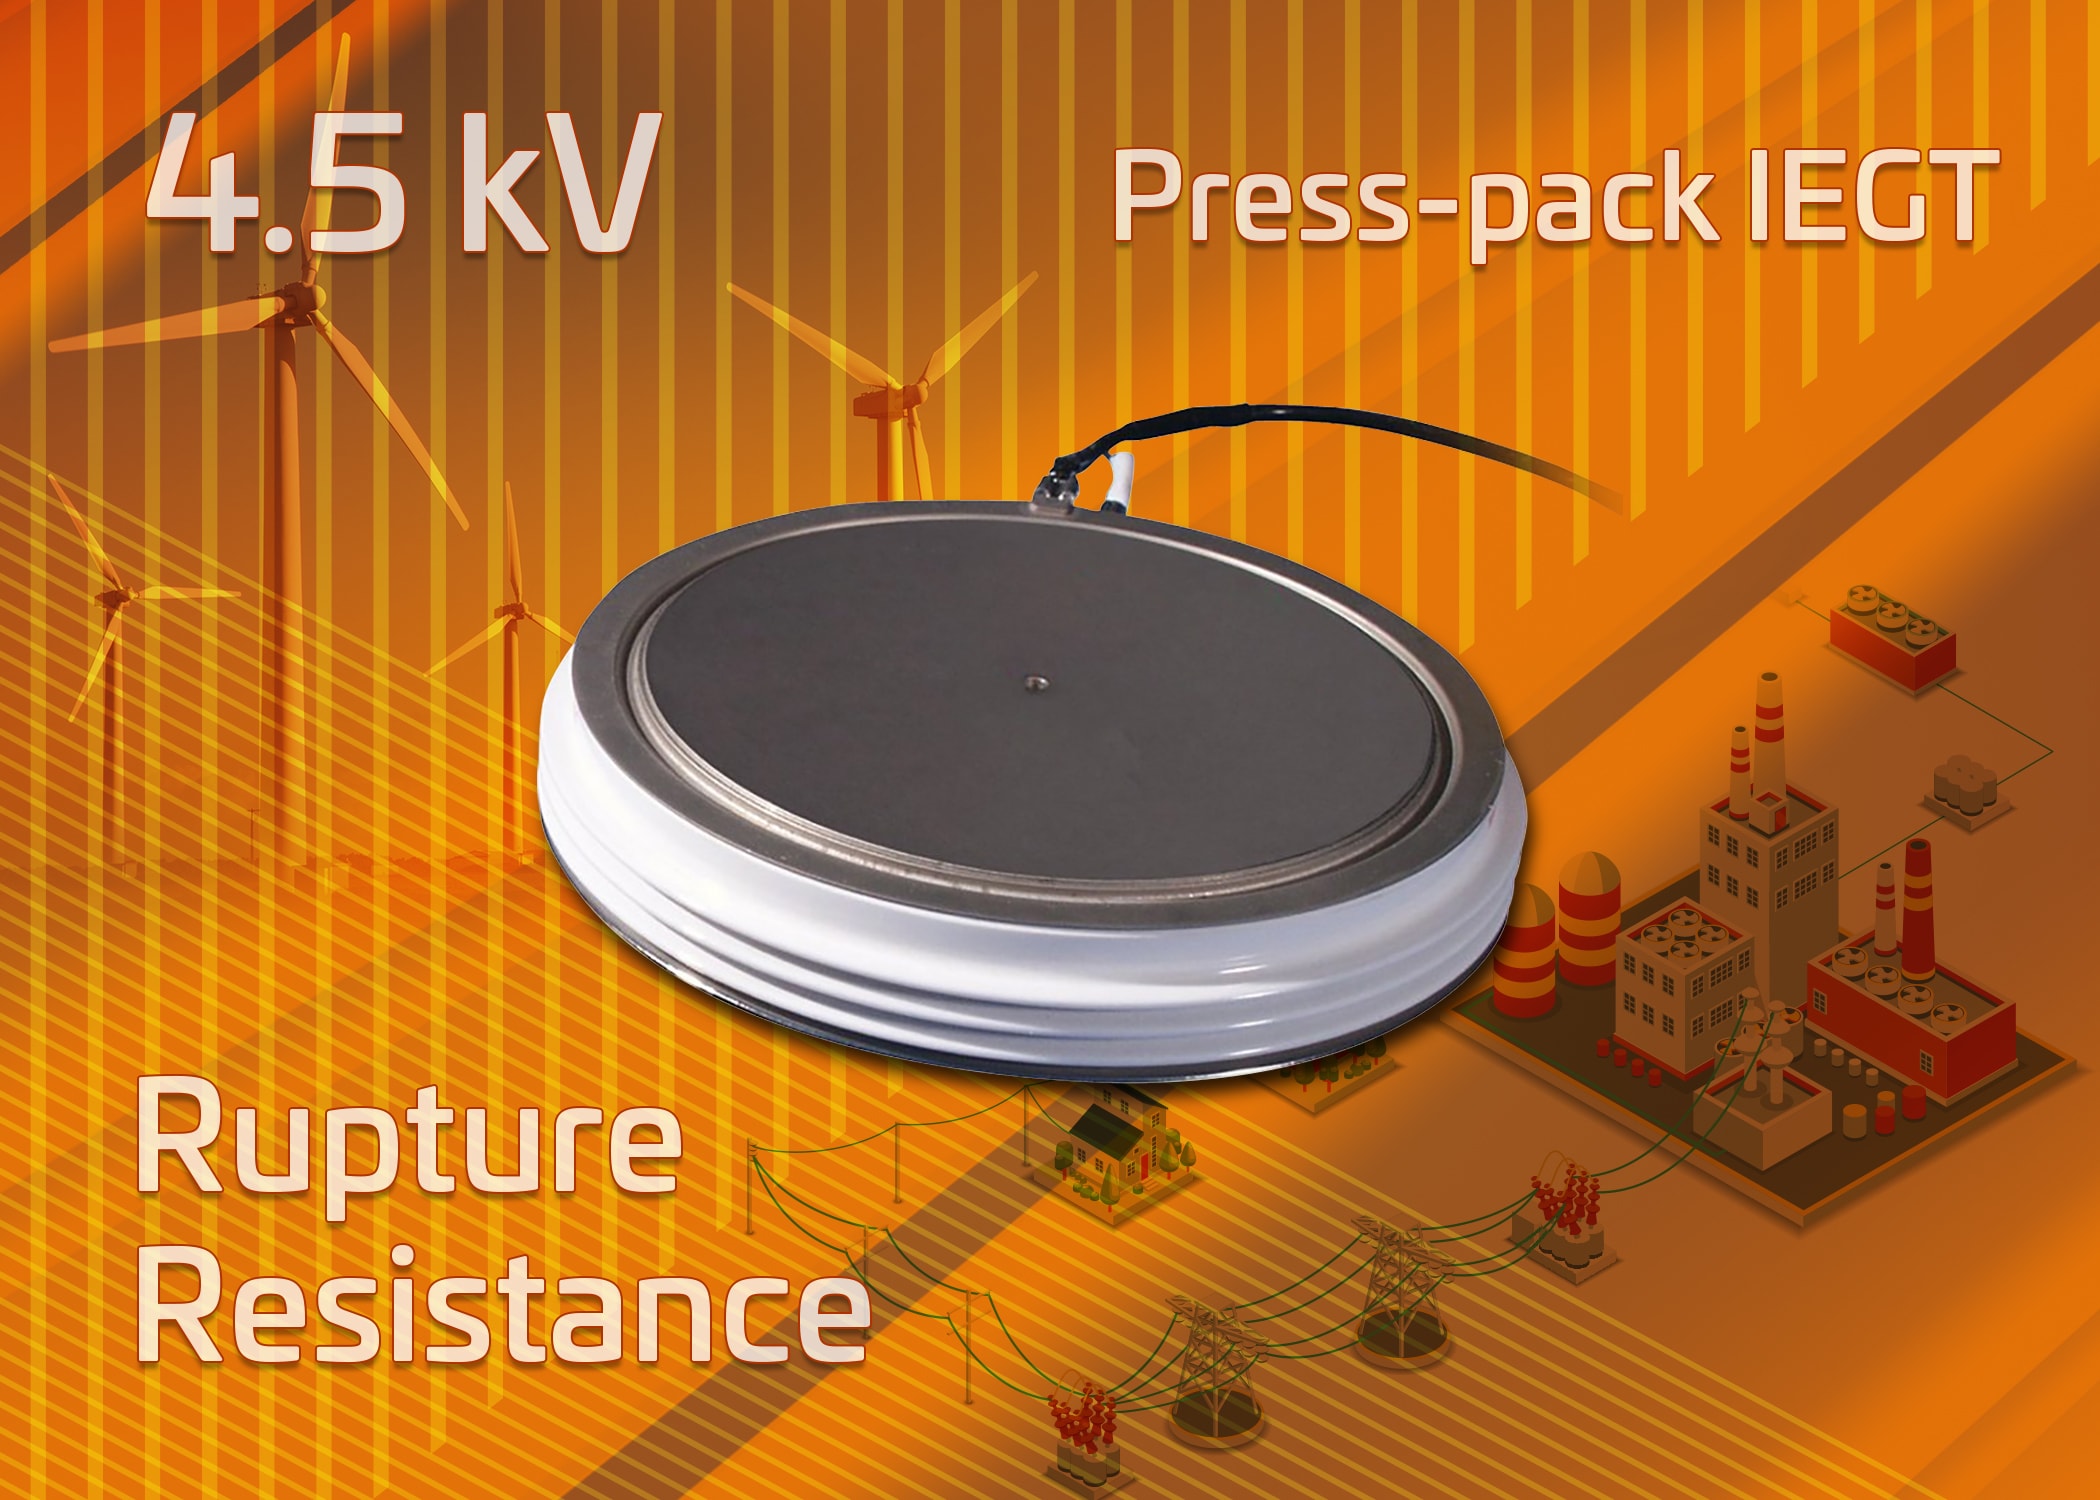 Toshiba develops 4.5 kV press-pack IEGT with improved rupture resistance